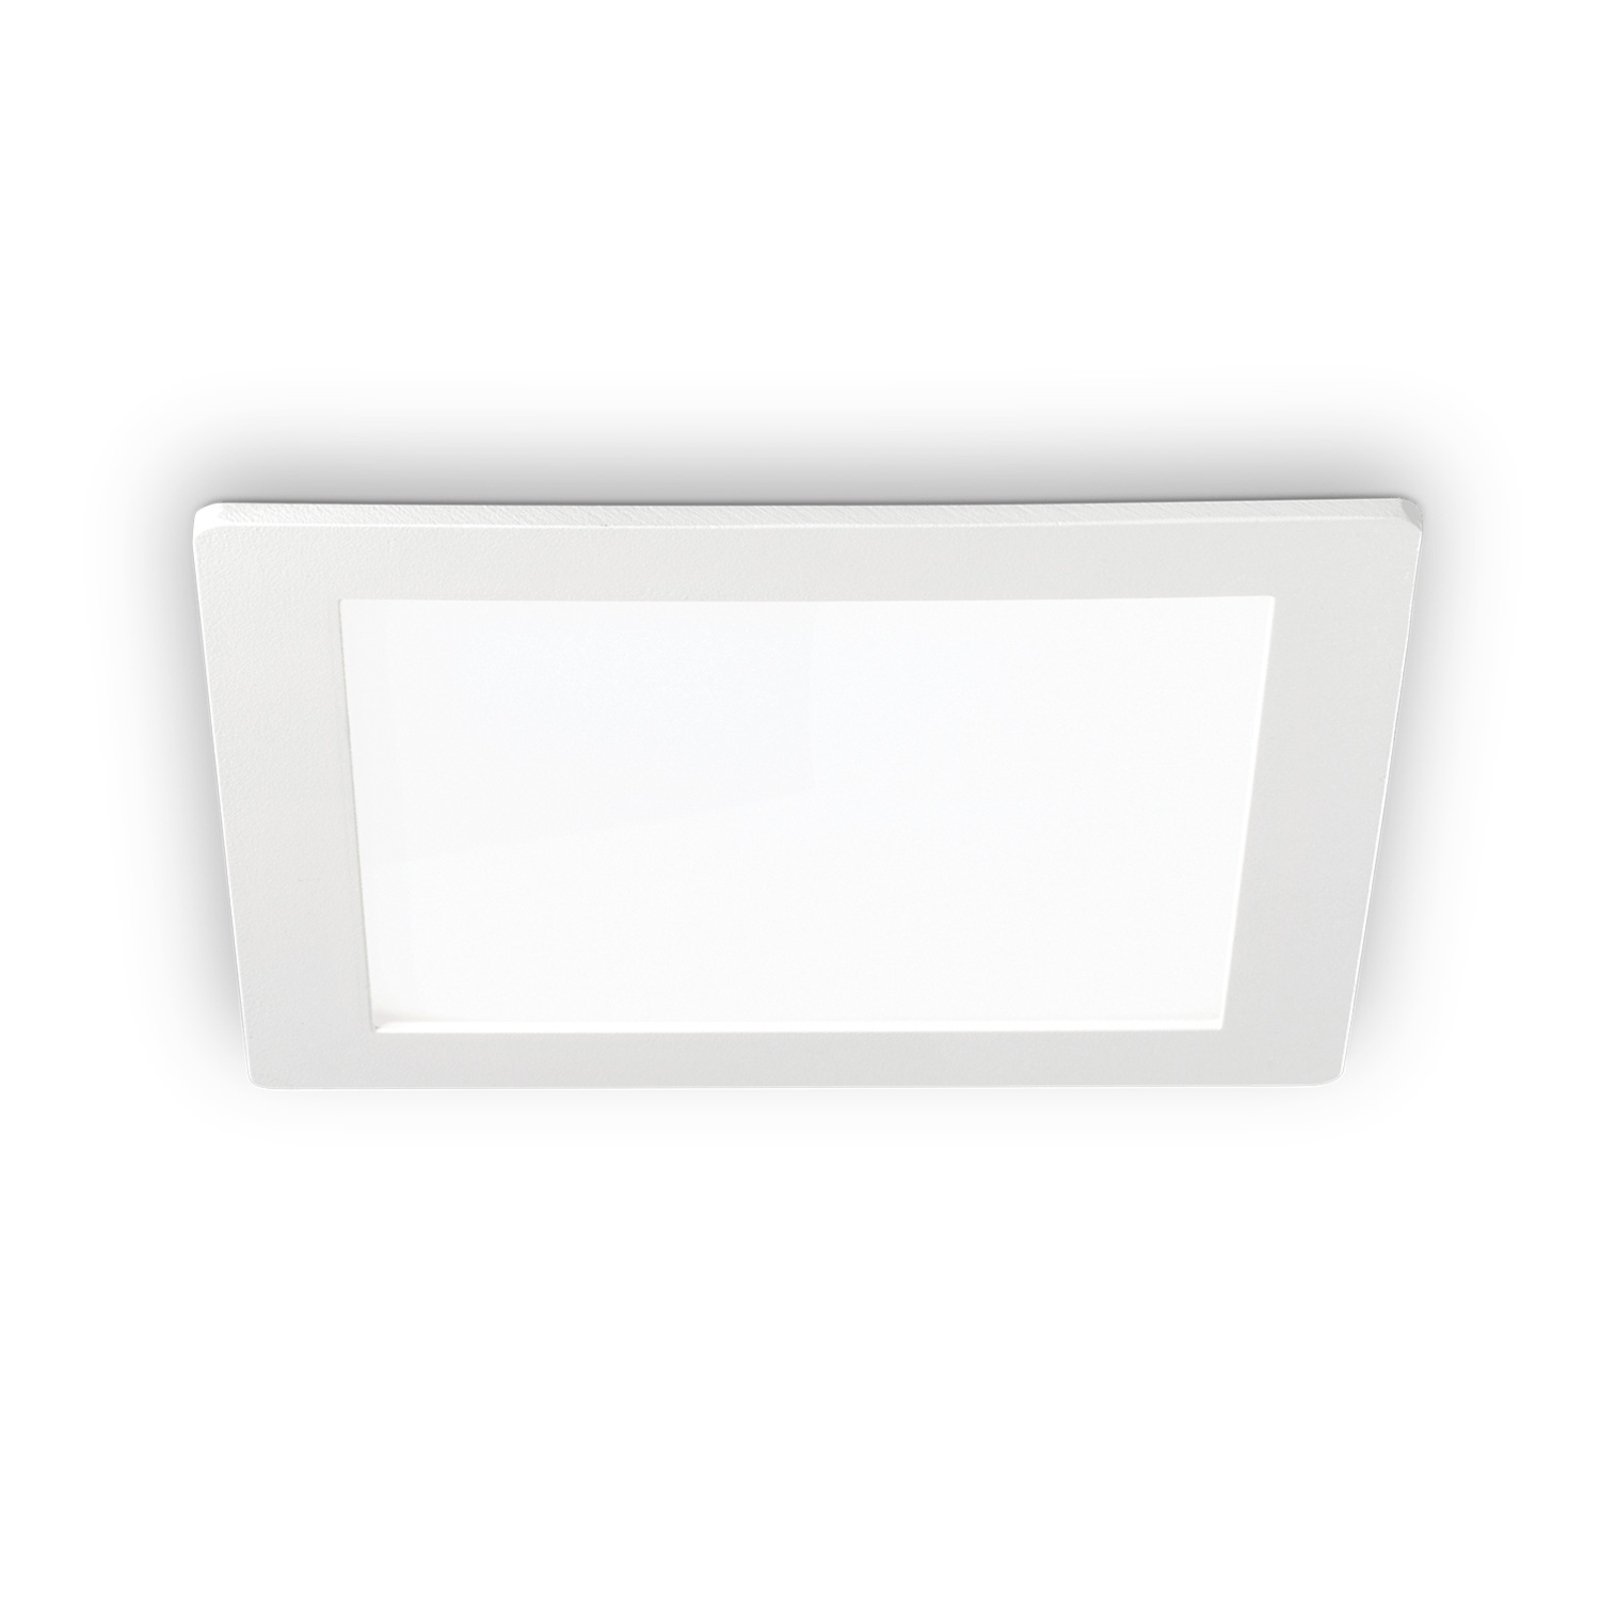 LED-taklampe Groove square 16,8x16,8 cm